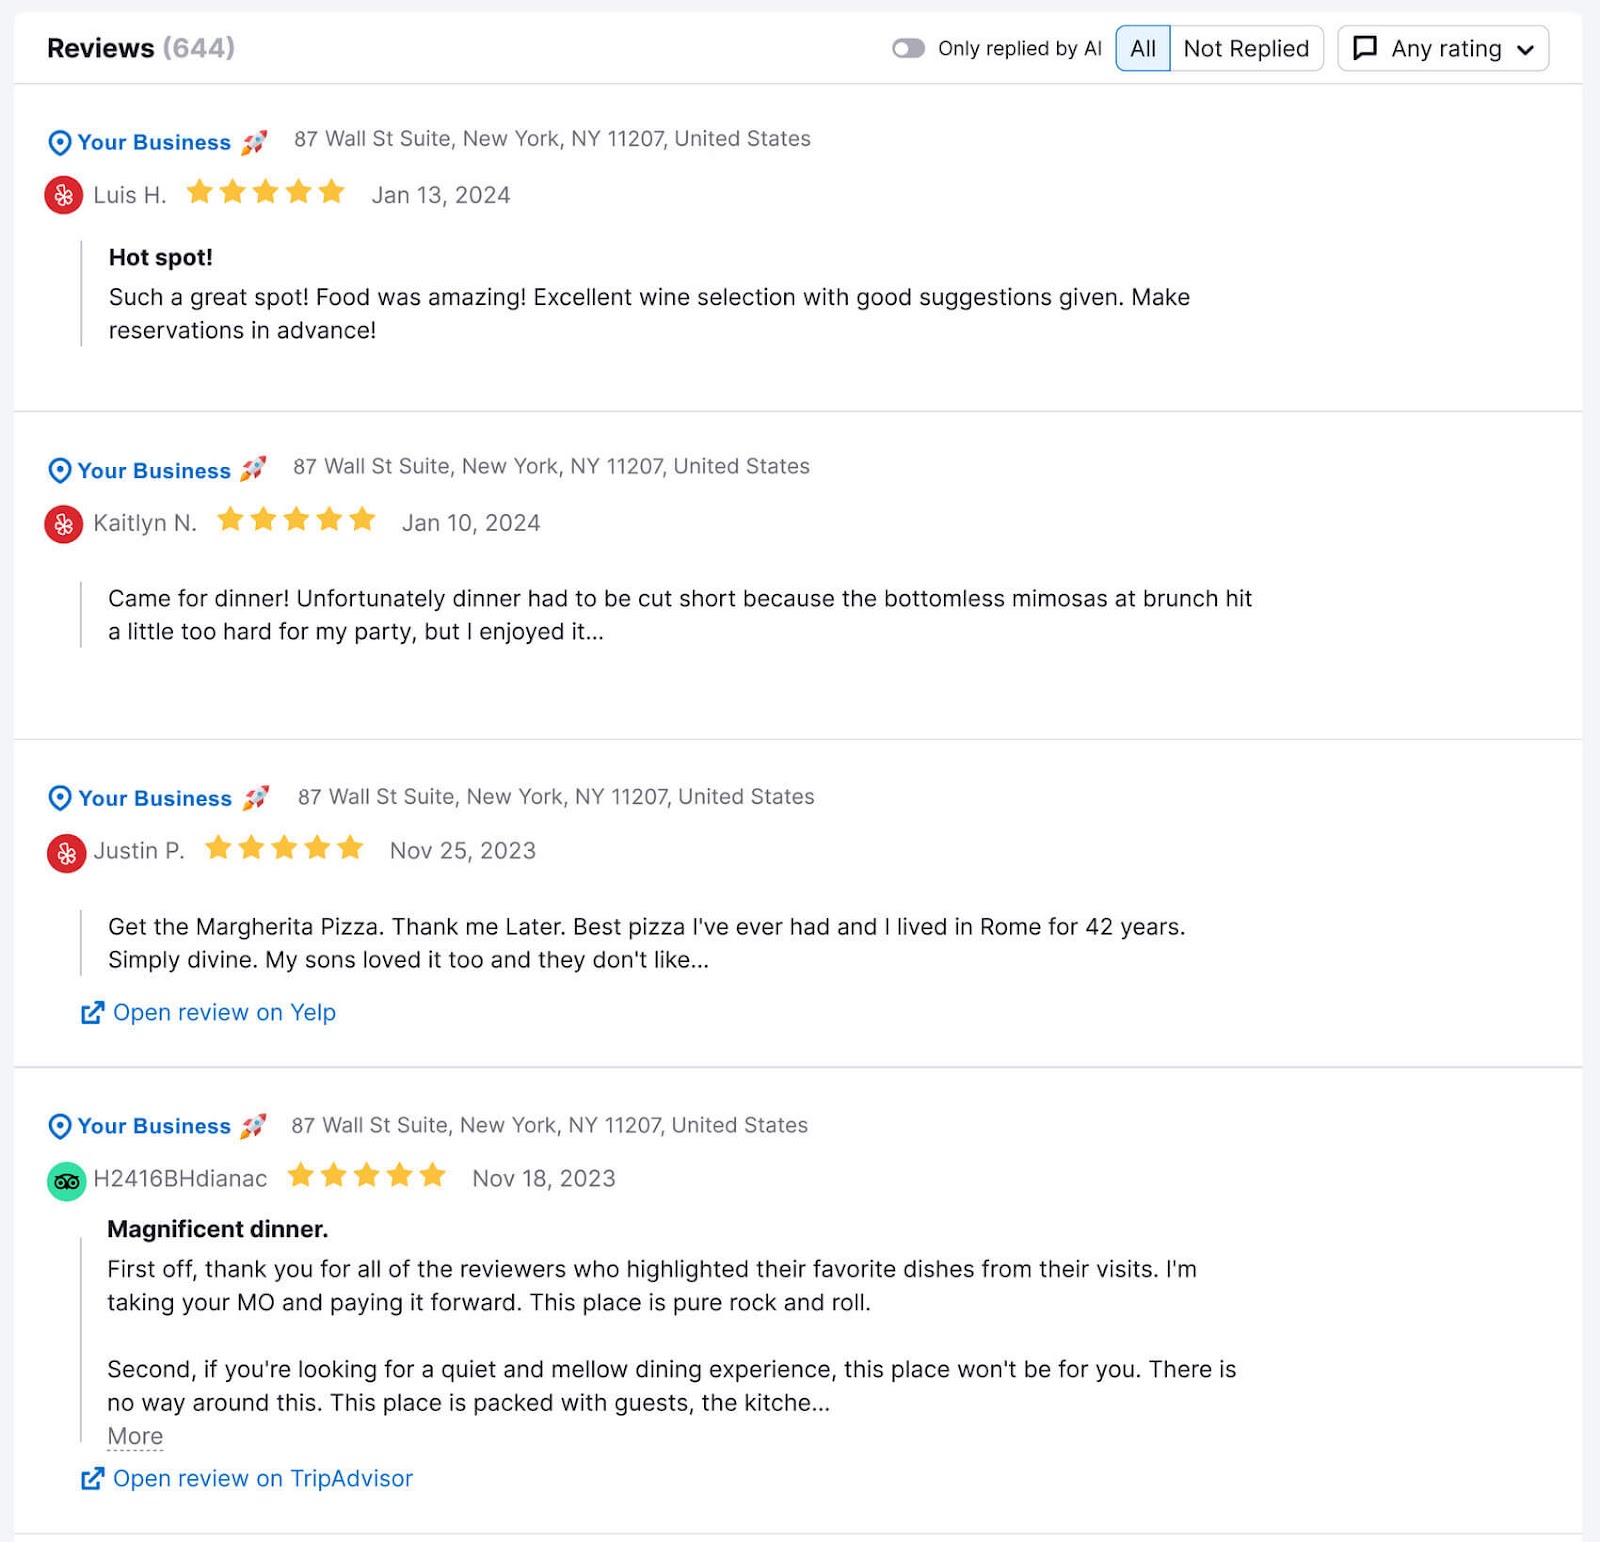 "Reviews" section in the Review Management tool